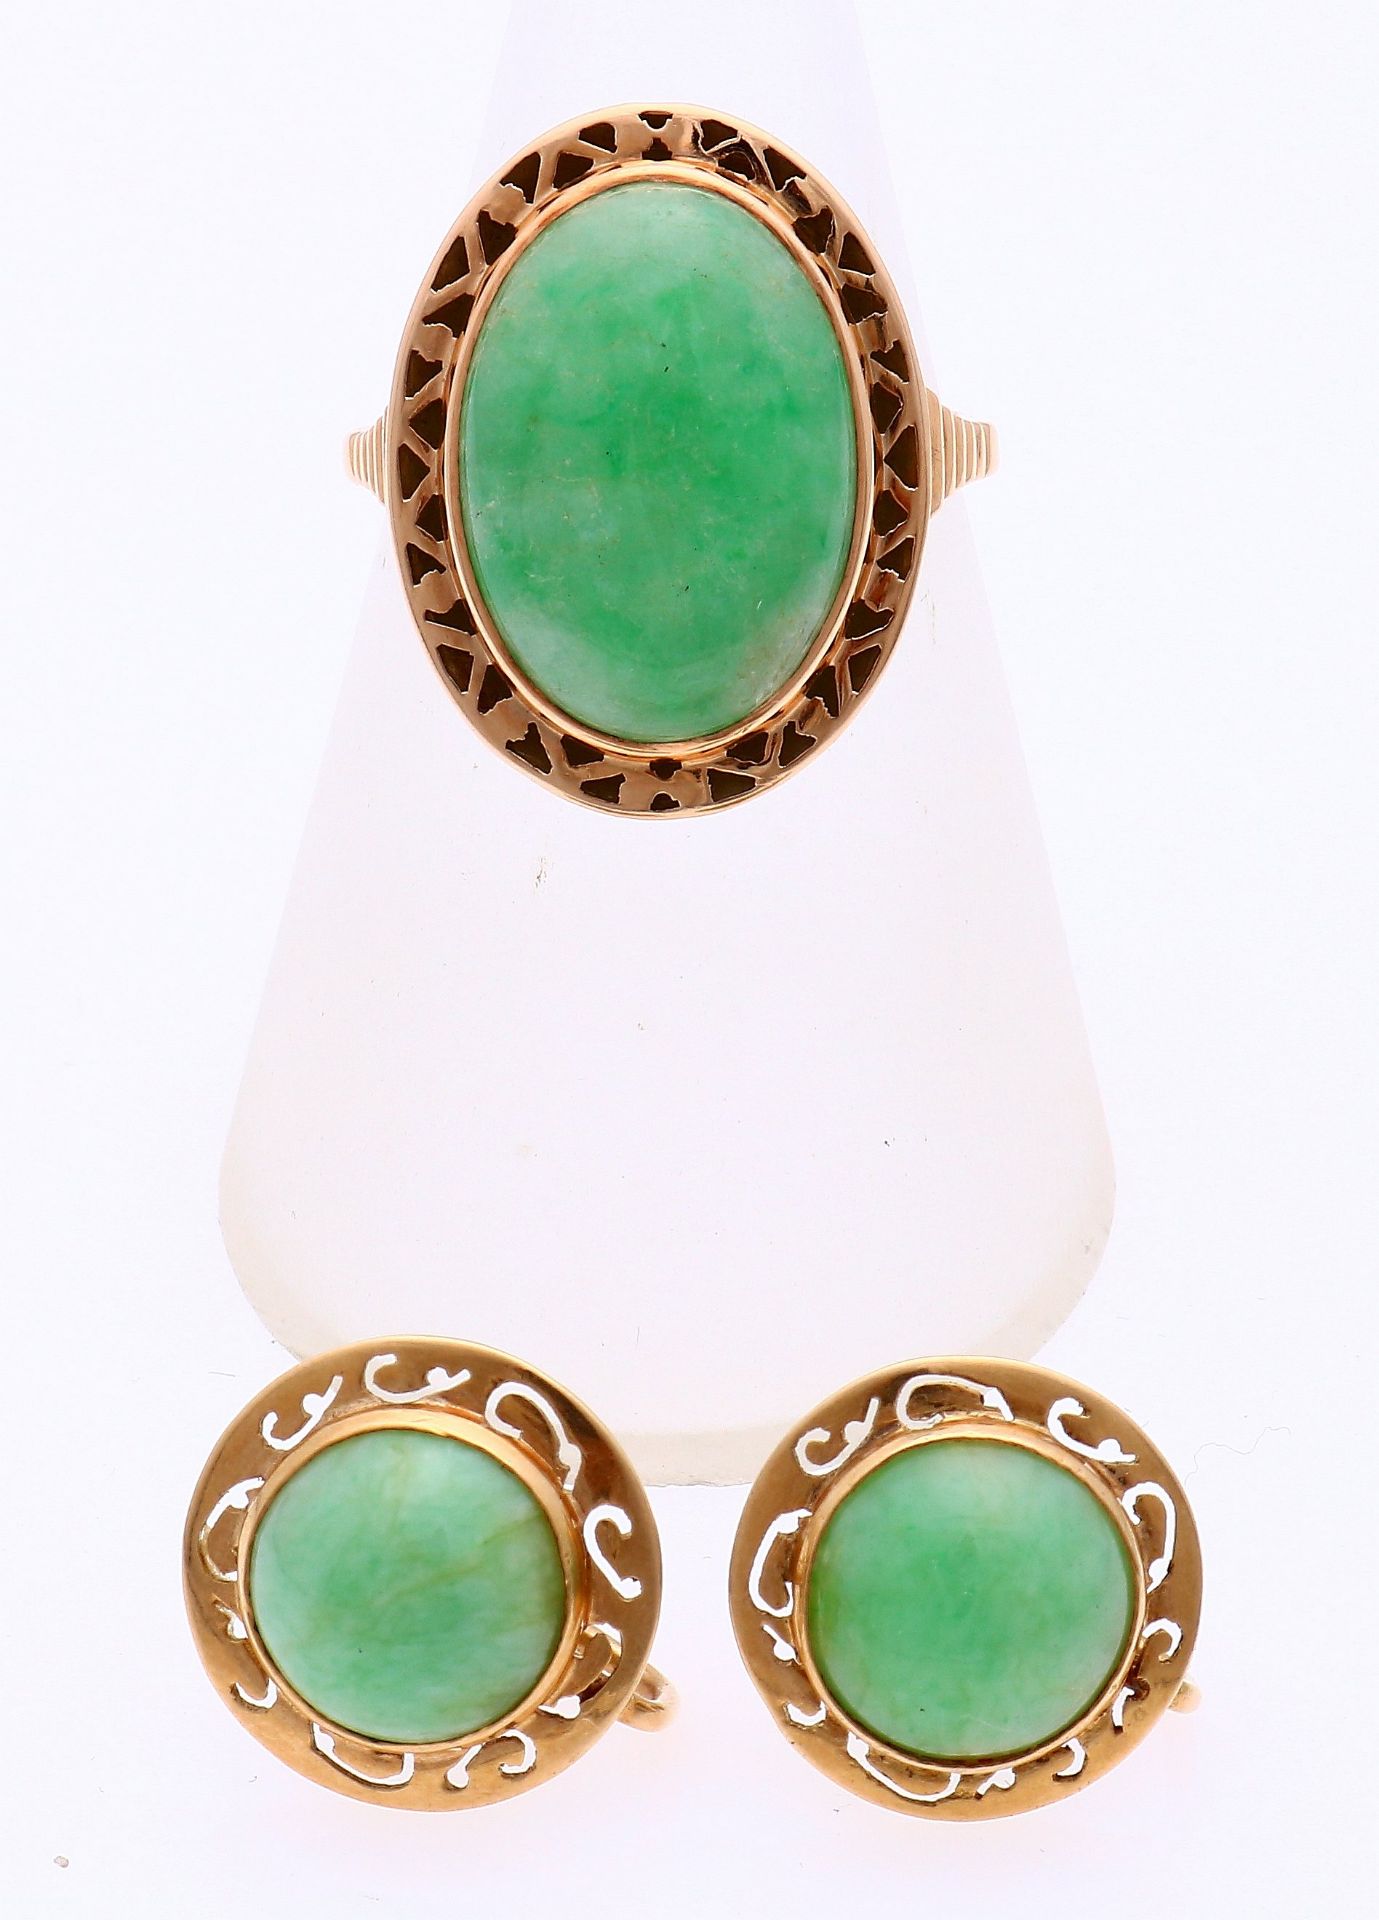 Gold ring & earrings with jade